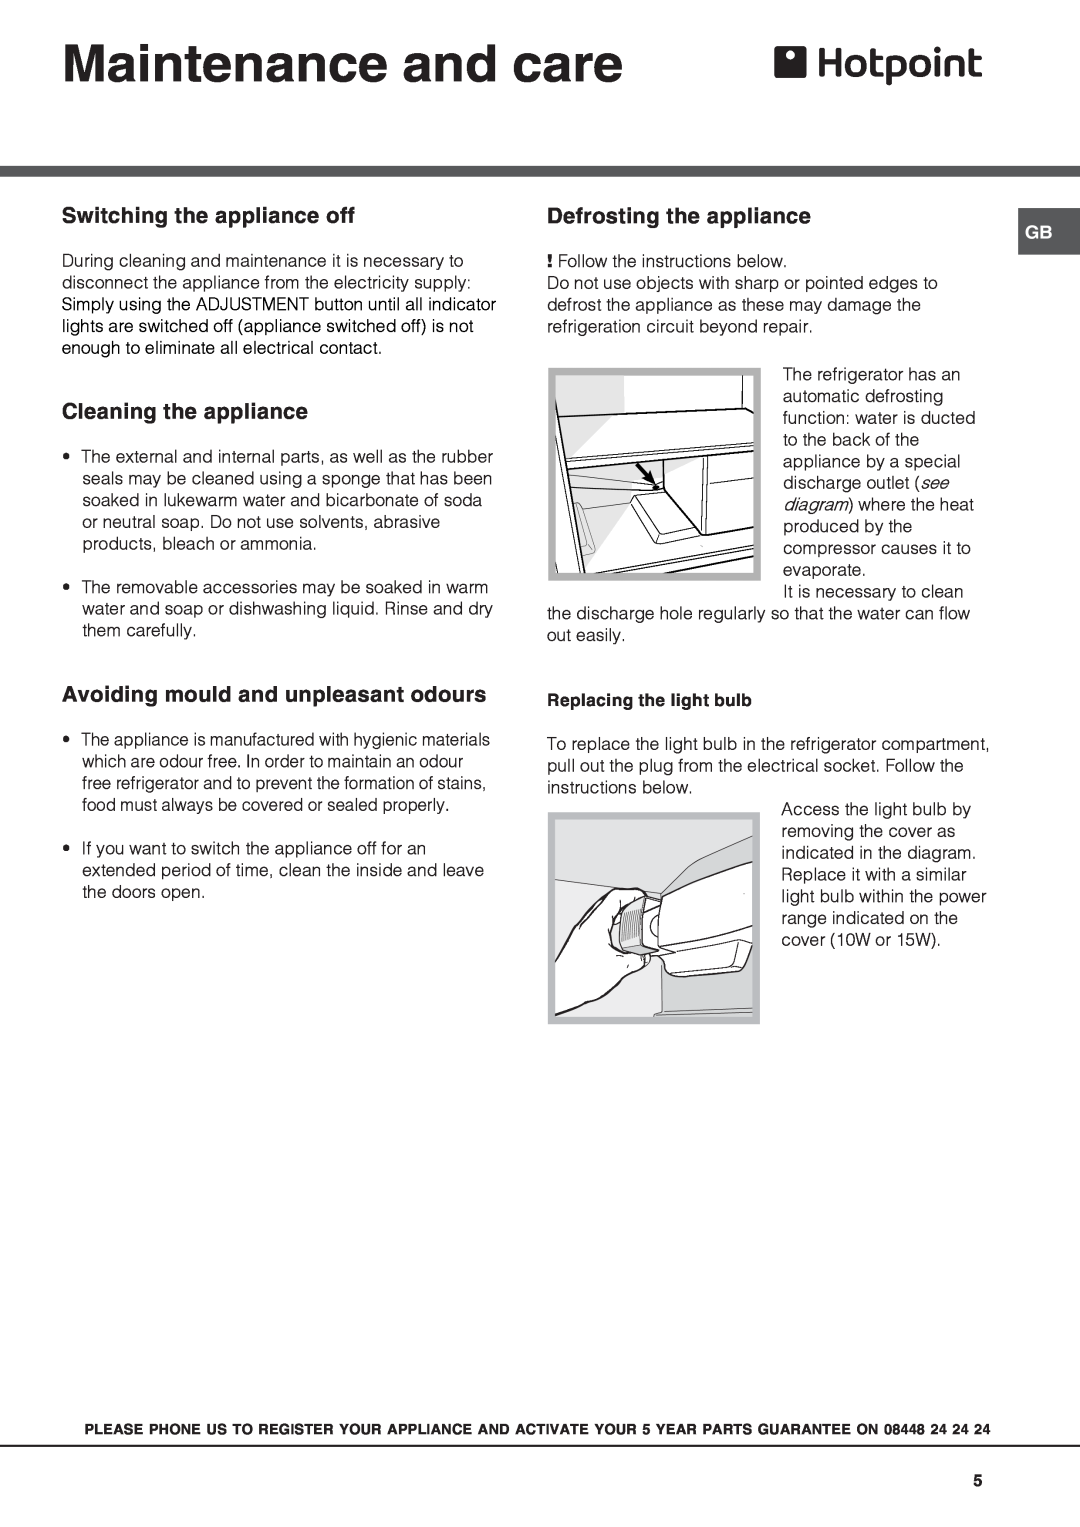 Hotpoint HS2322L manual Maintenance and care, Switching the appliance off, Defrosting the appliance, Cleaning the appliance 